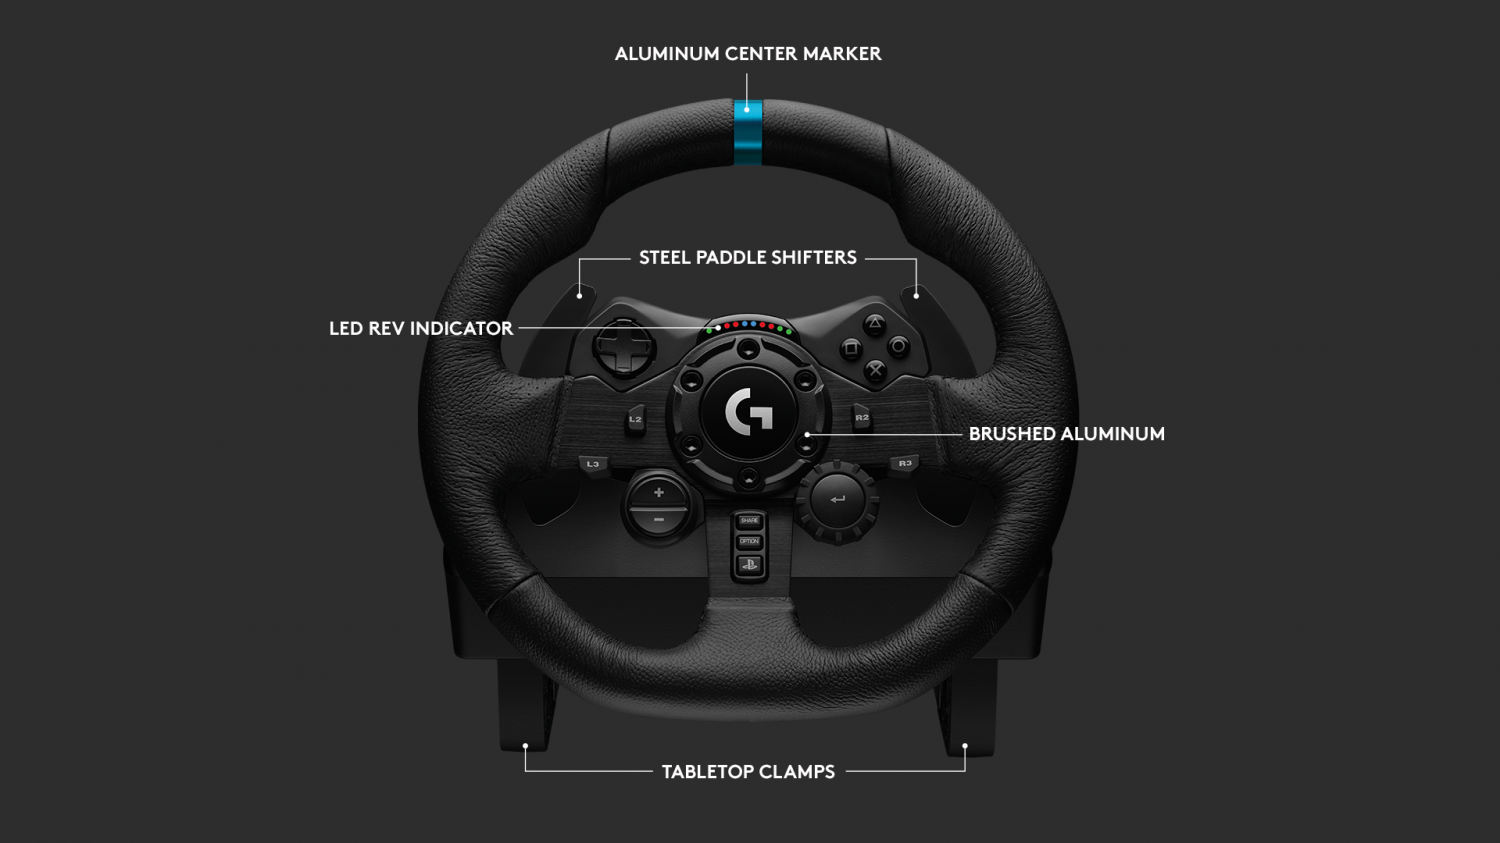 Got a wheel for the PS5 - Gran Turismo is a whole different experience now.  : r/granturismo